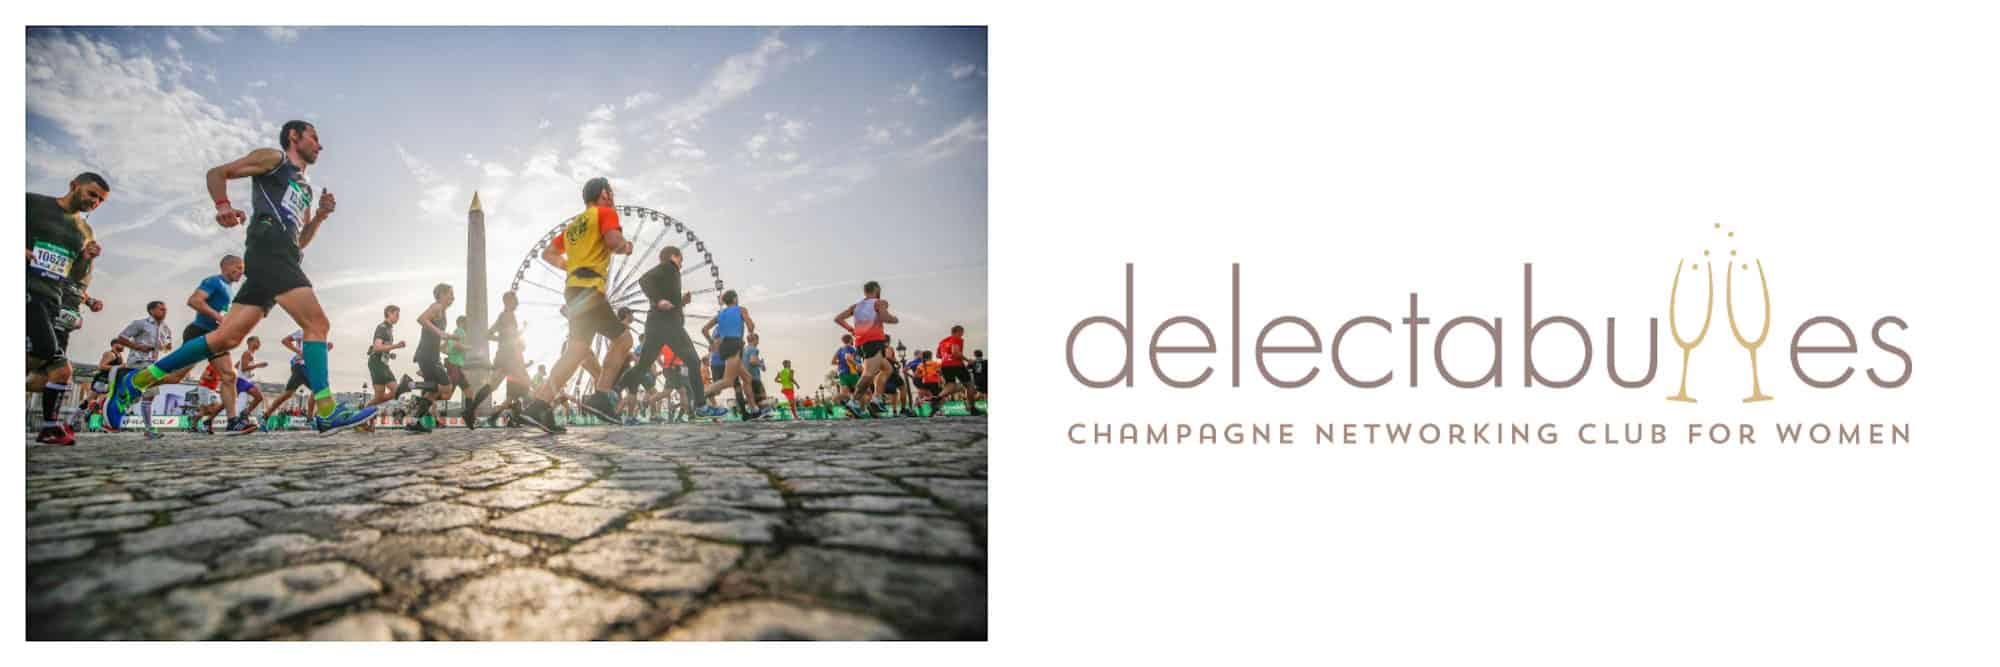 Runners during the Paris Marathon in April on Place de la Concorde (left). The logo for Delectabulles, which will be doing champagne tastings this April in Paris (right).